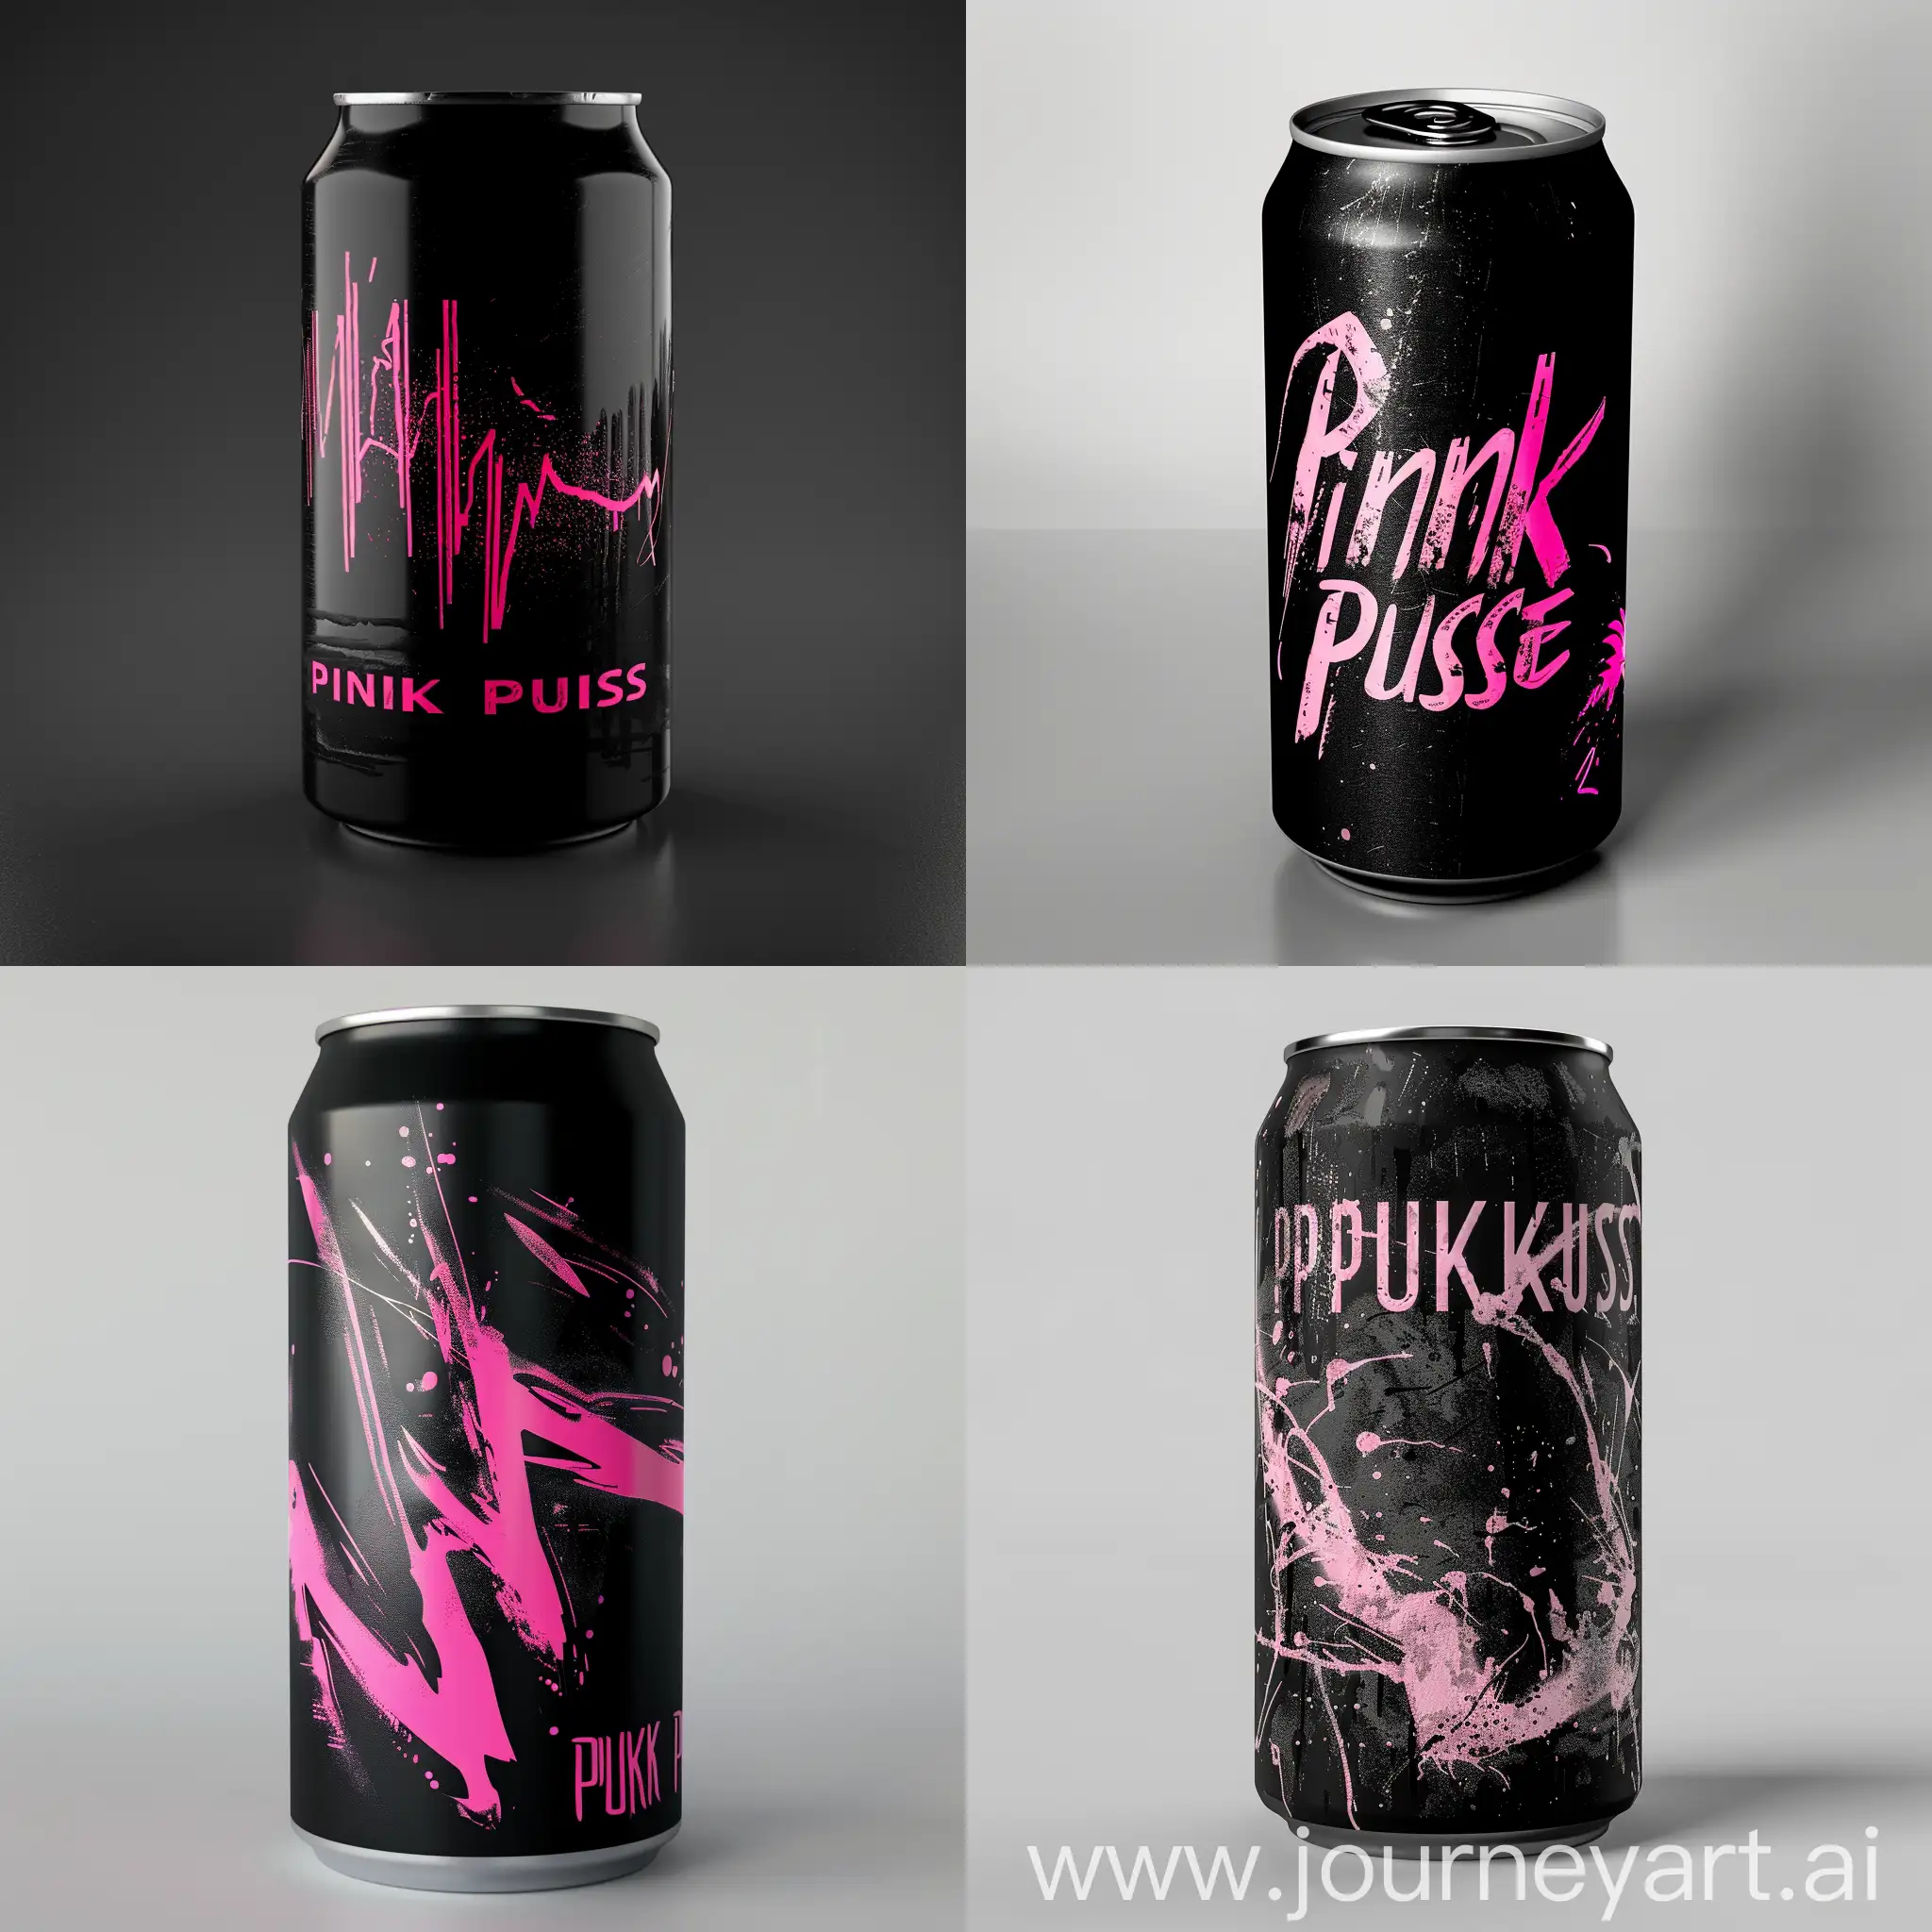 design a black drink can for a drink called pink pulse, where the i and u in pInk are pUlse as in the drawing of a pulse. like p^nk pvlse .  